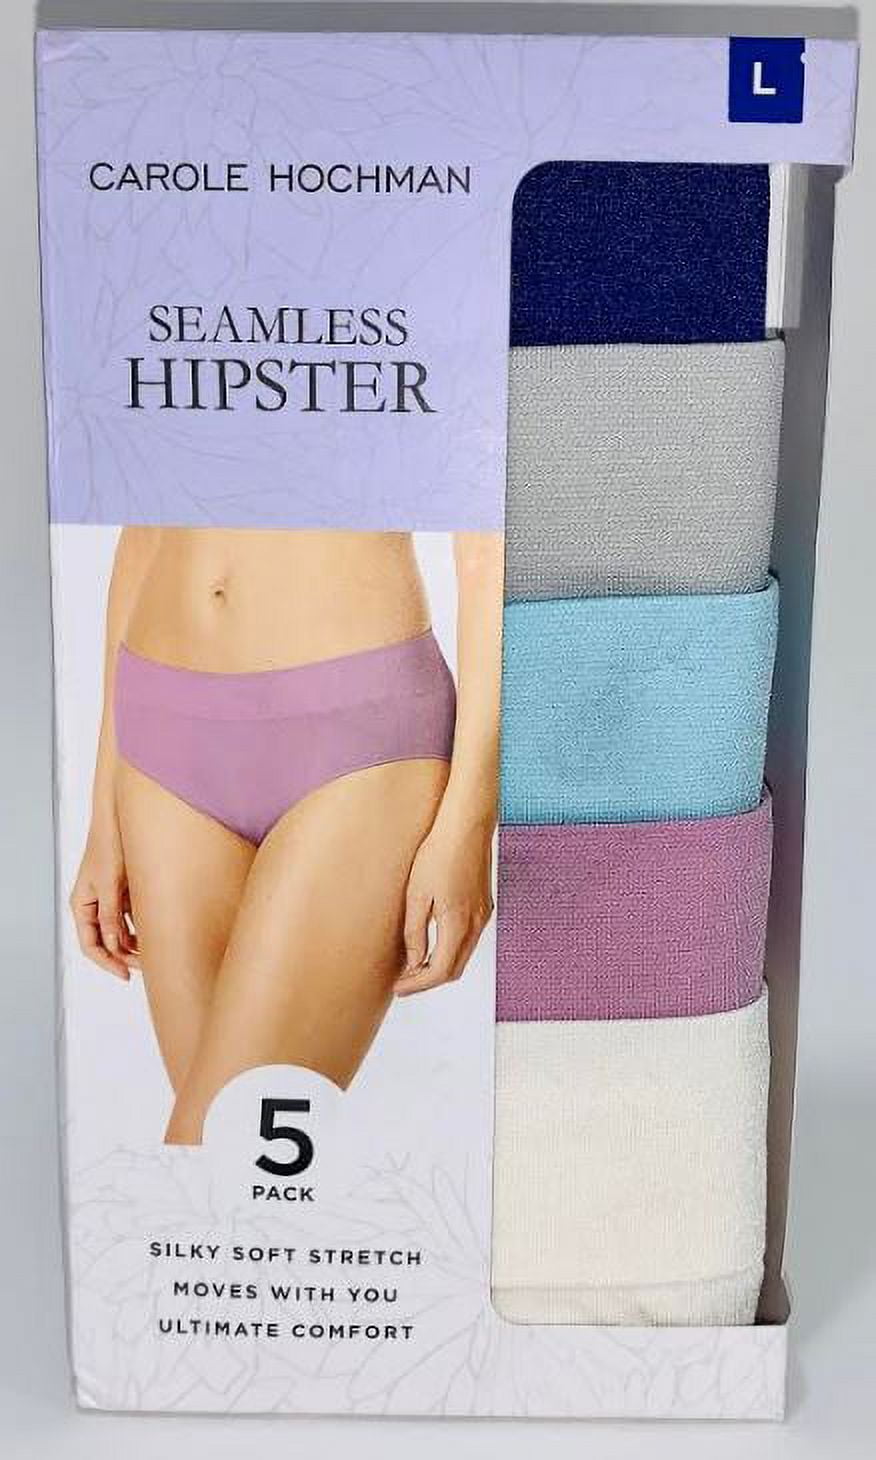 Carole Hochman Ladies' 5-Pack Seamless Hipster Panty, Multicolor, Large -  NEW 